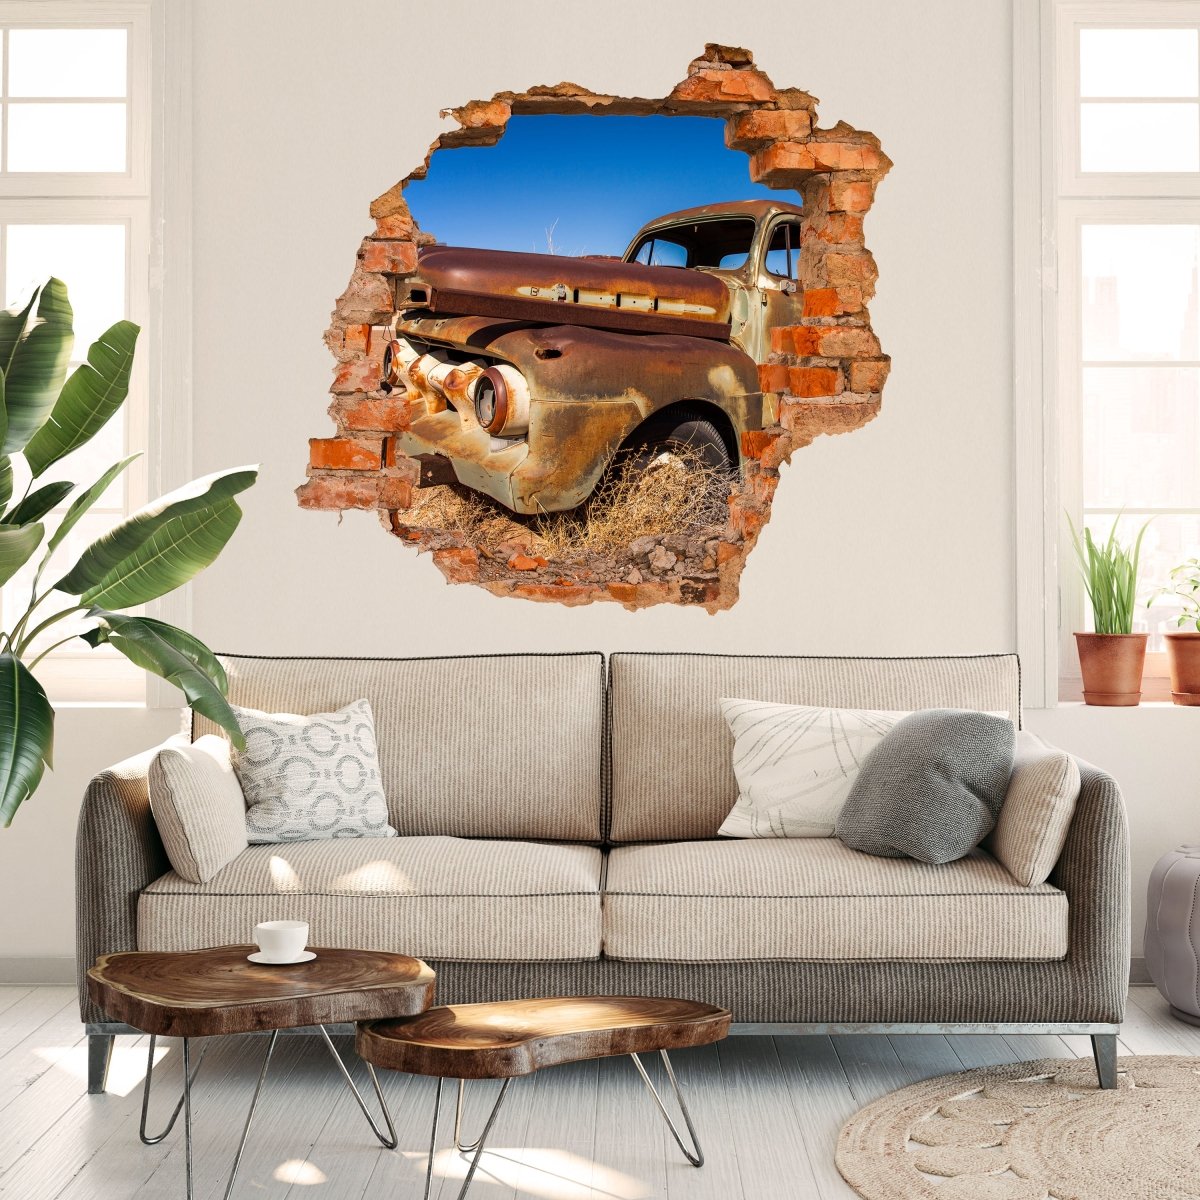 3D Wall Sticker Old Picup in the Desert - Wall Decal M0407